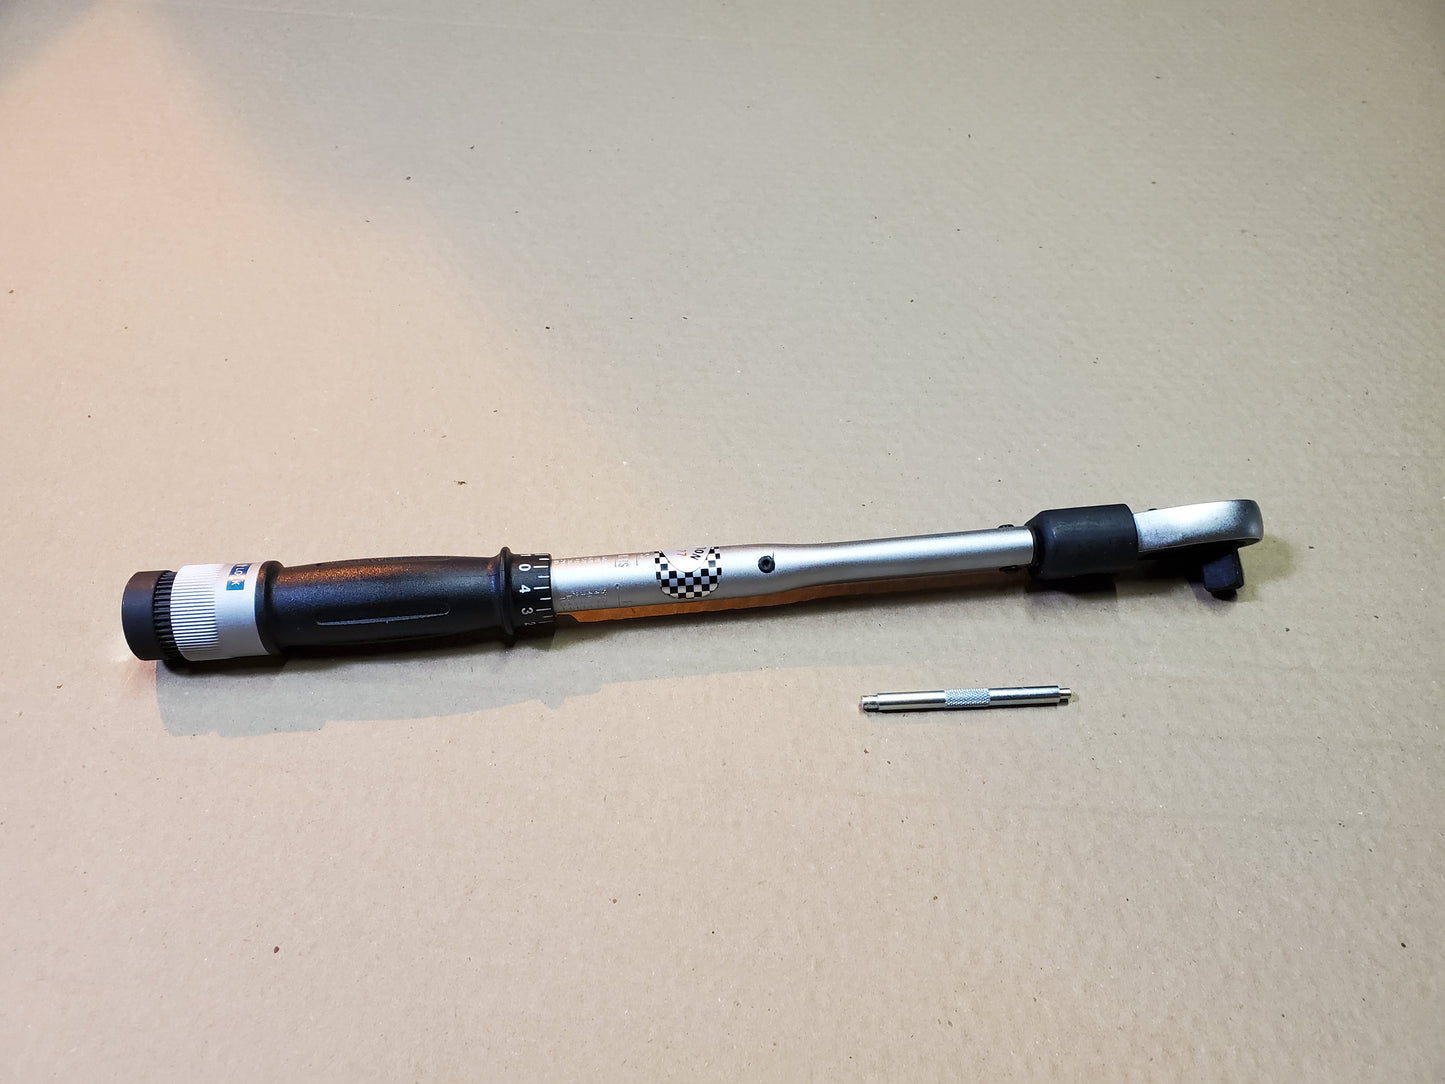 1/2" SAE TORQUE WRENCH HANDLE